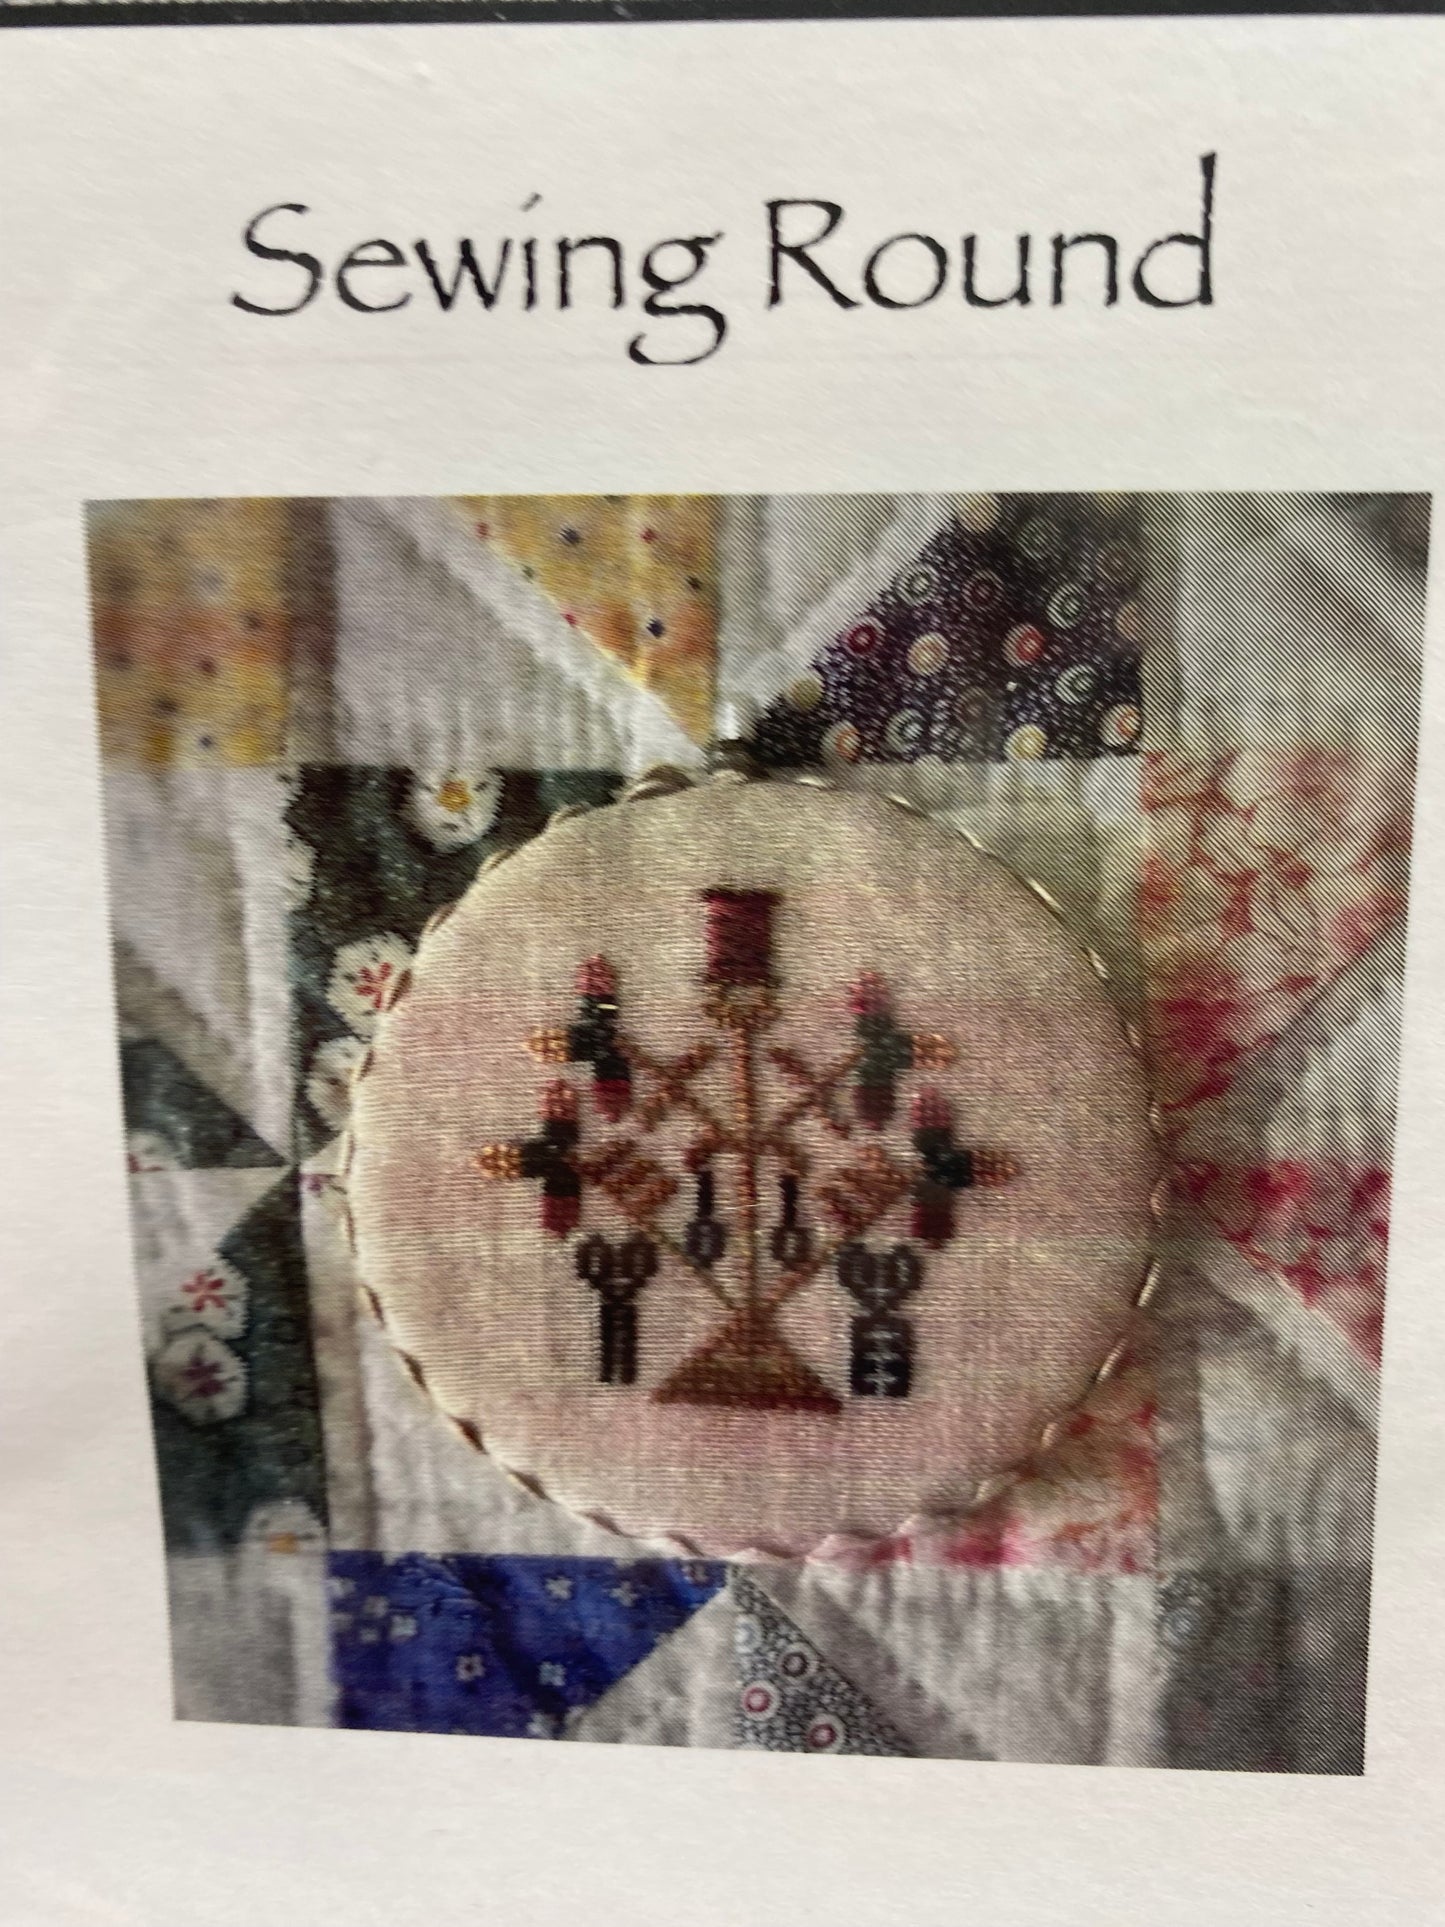 Sewing Round by Lucy Beam